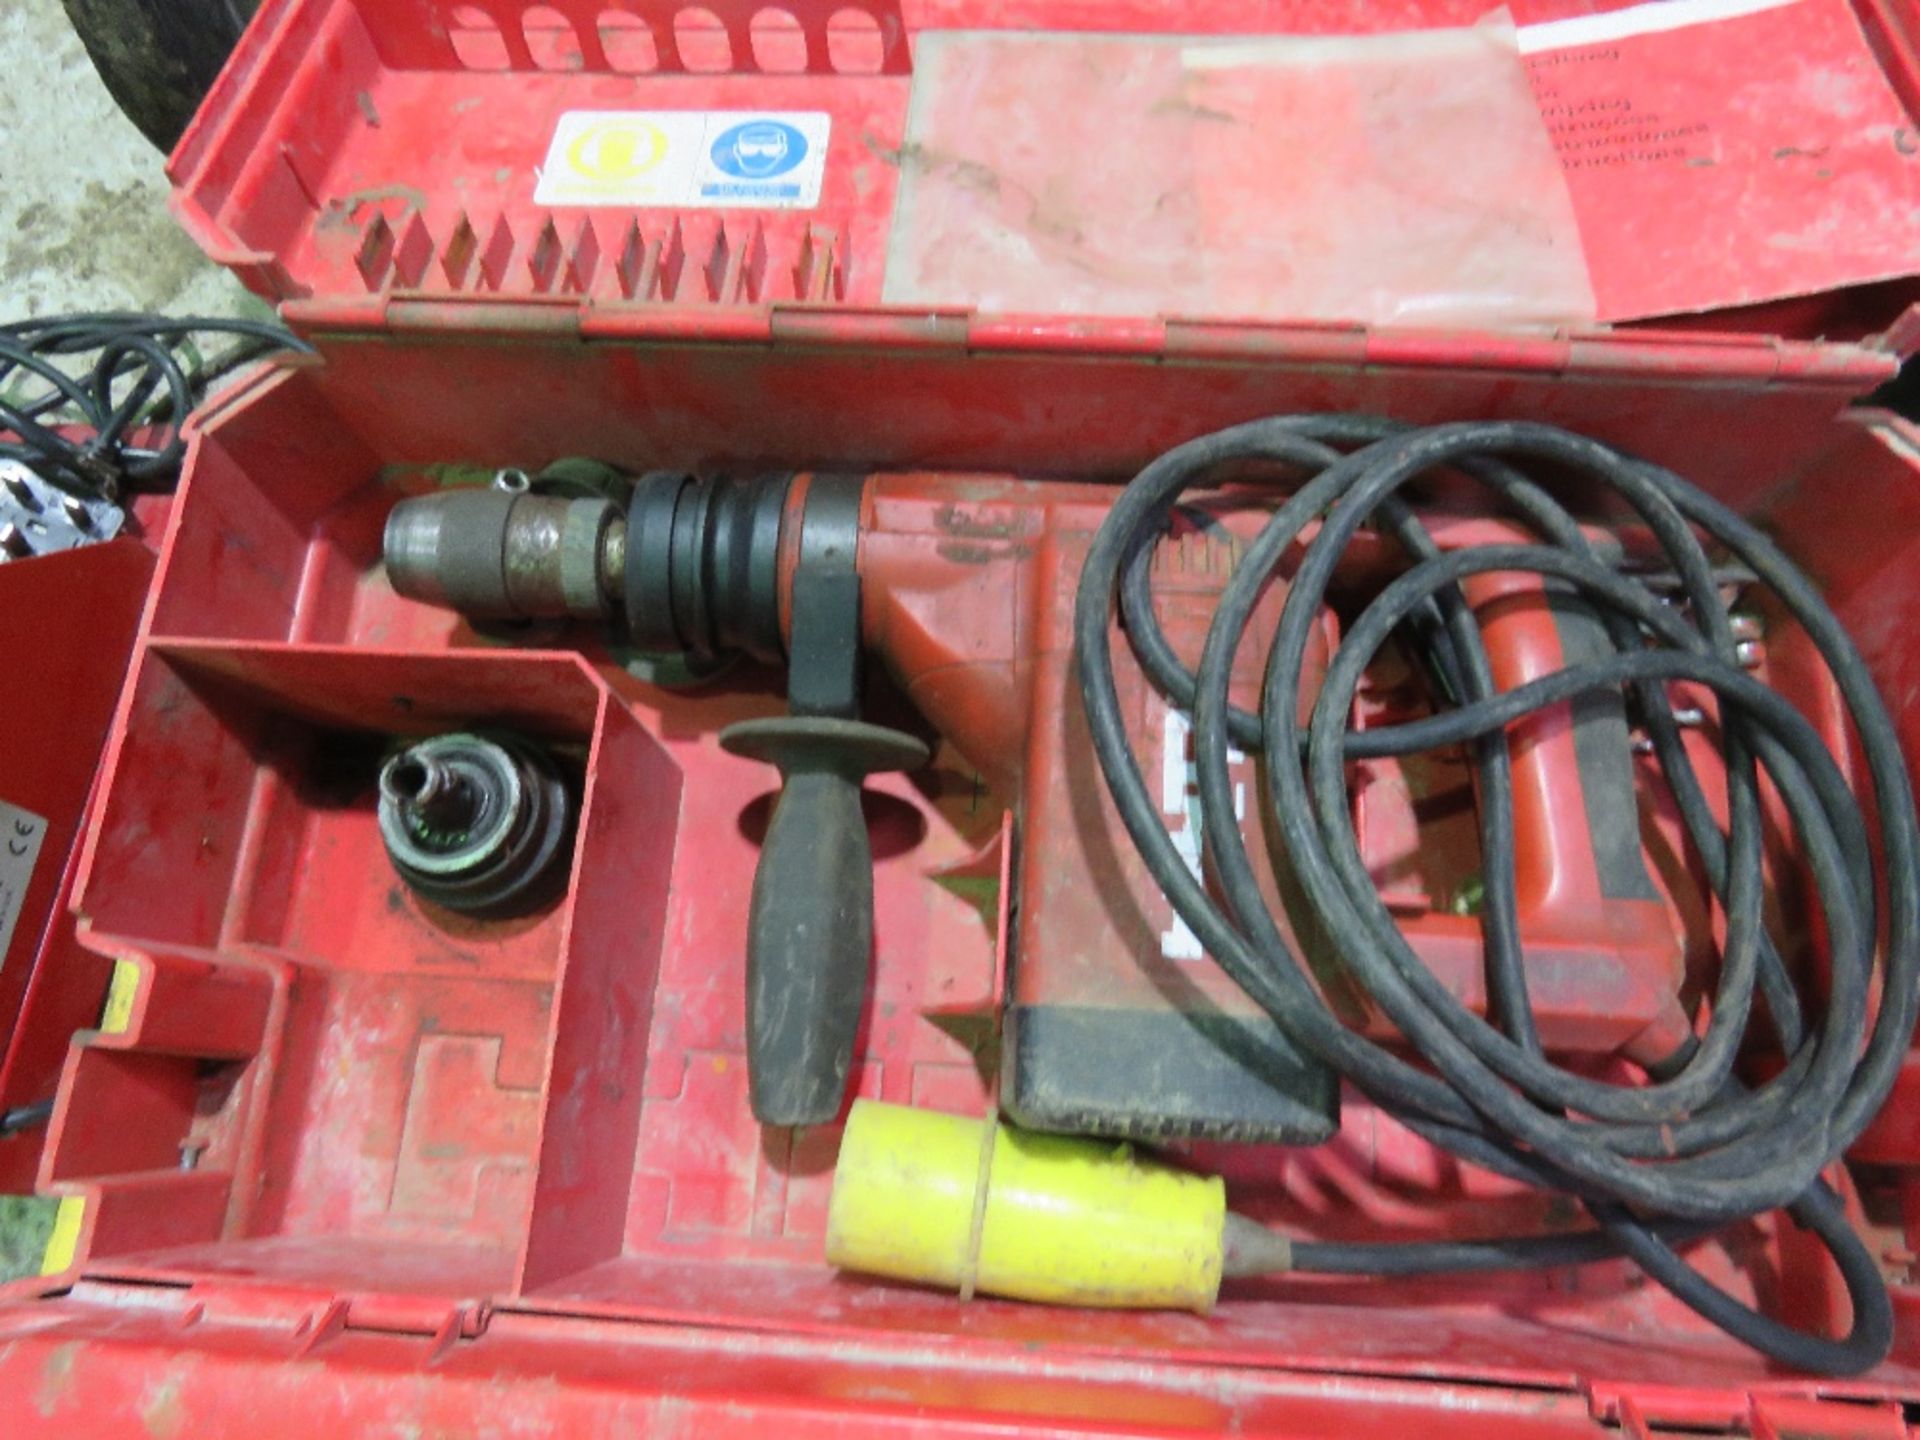 2 X BREAKER DRILLS IN CASES. SOURCED FROM GARAGE COMPANY LIQUIDATION. - Image 2 of 6